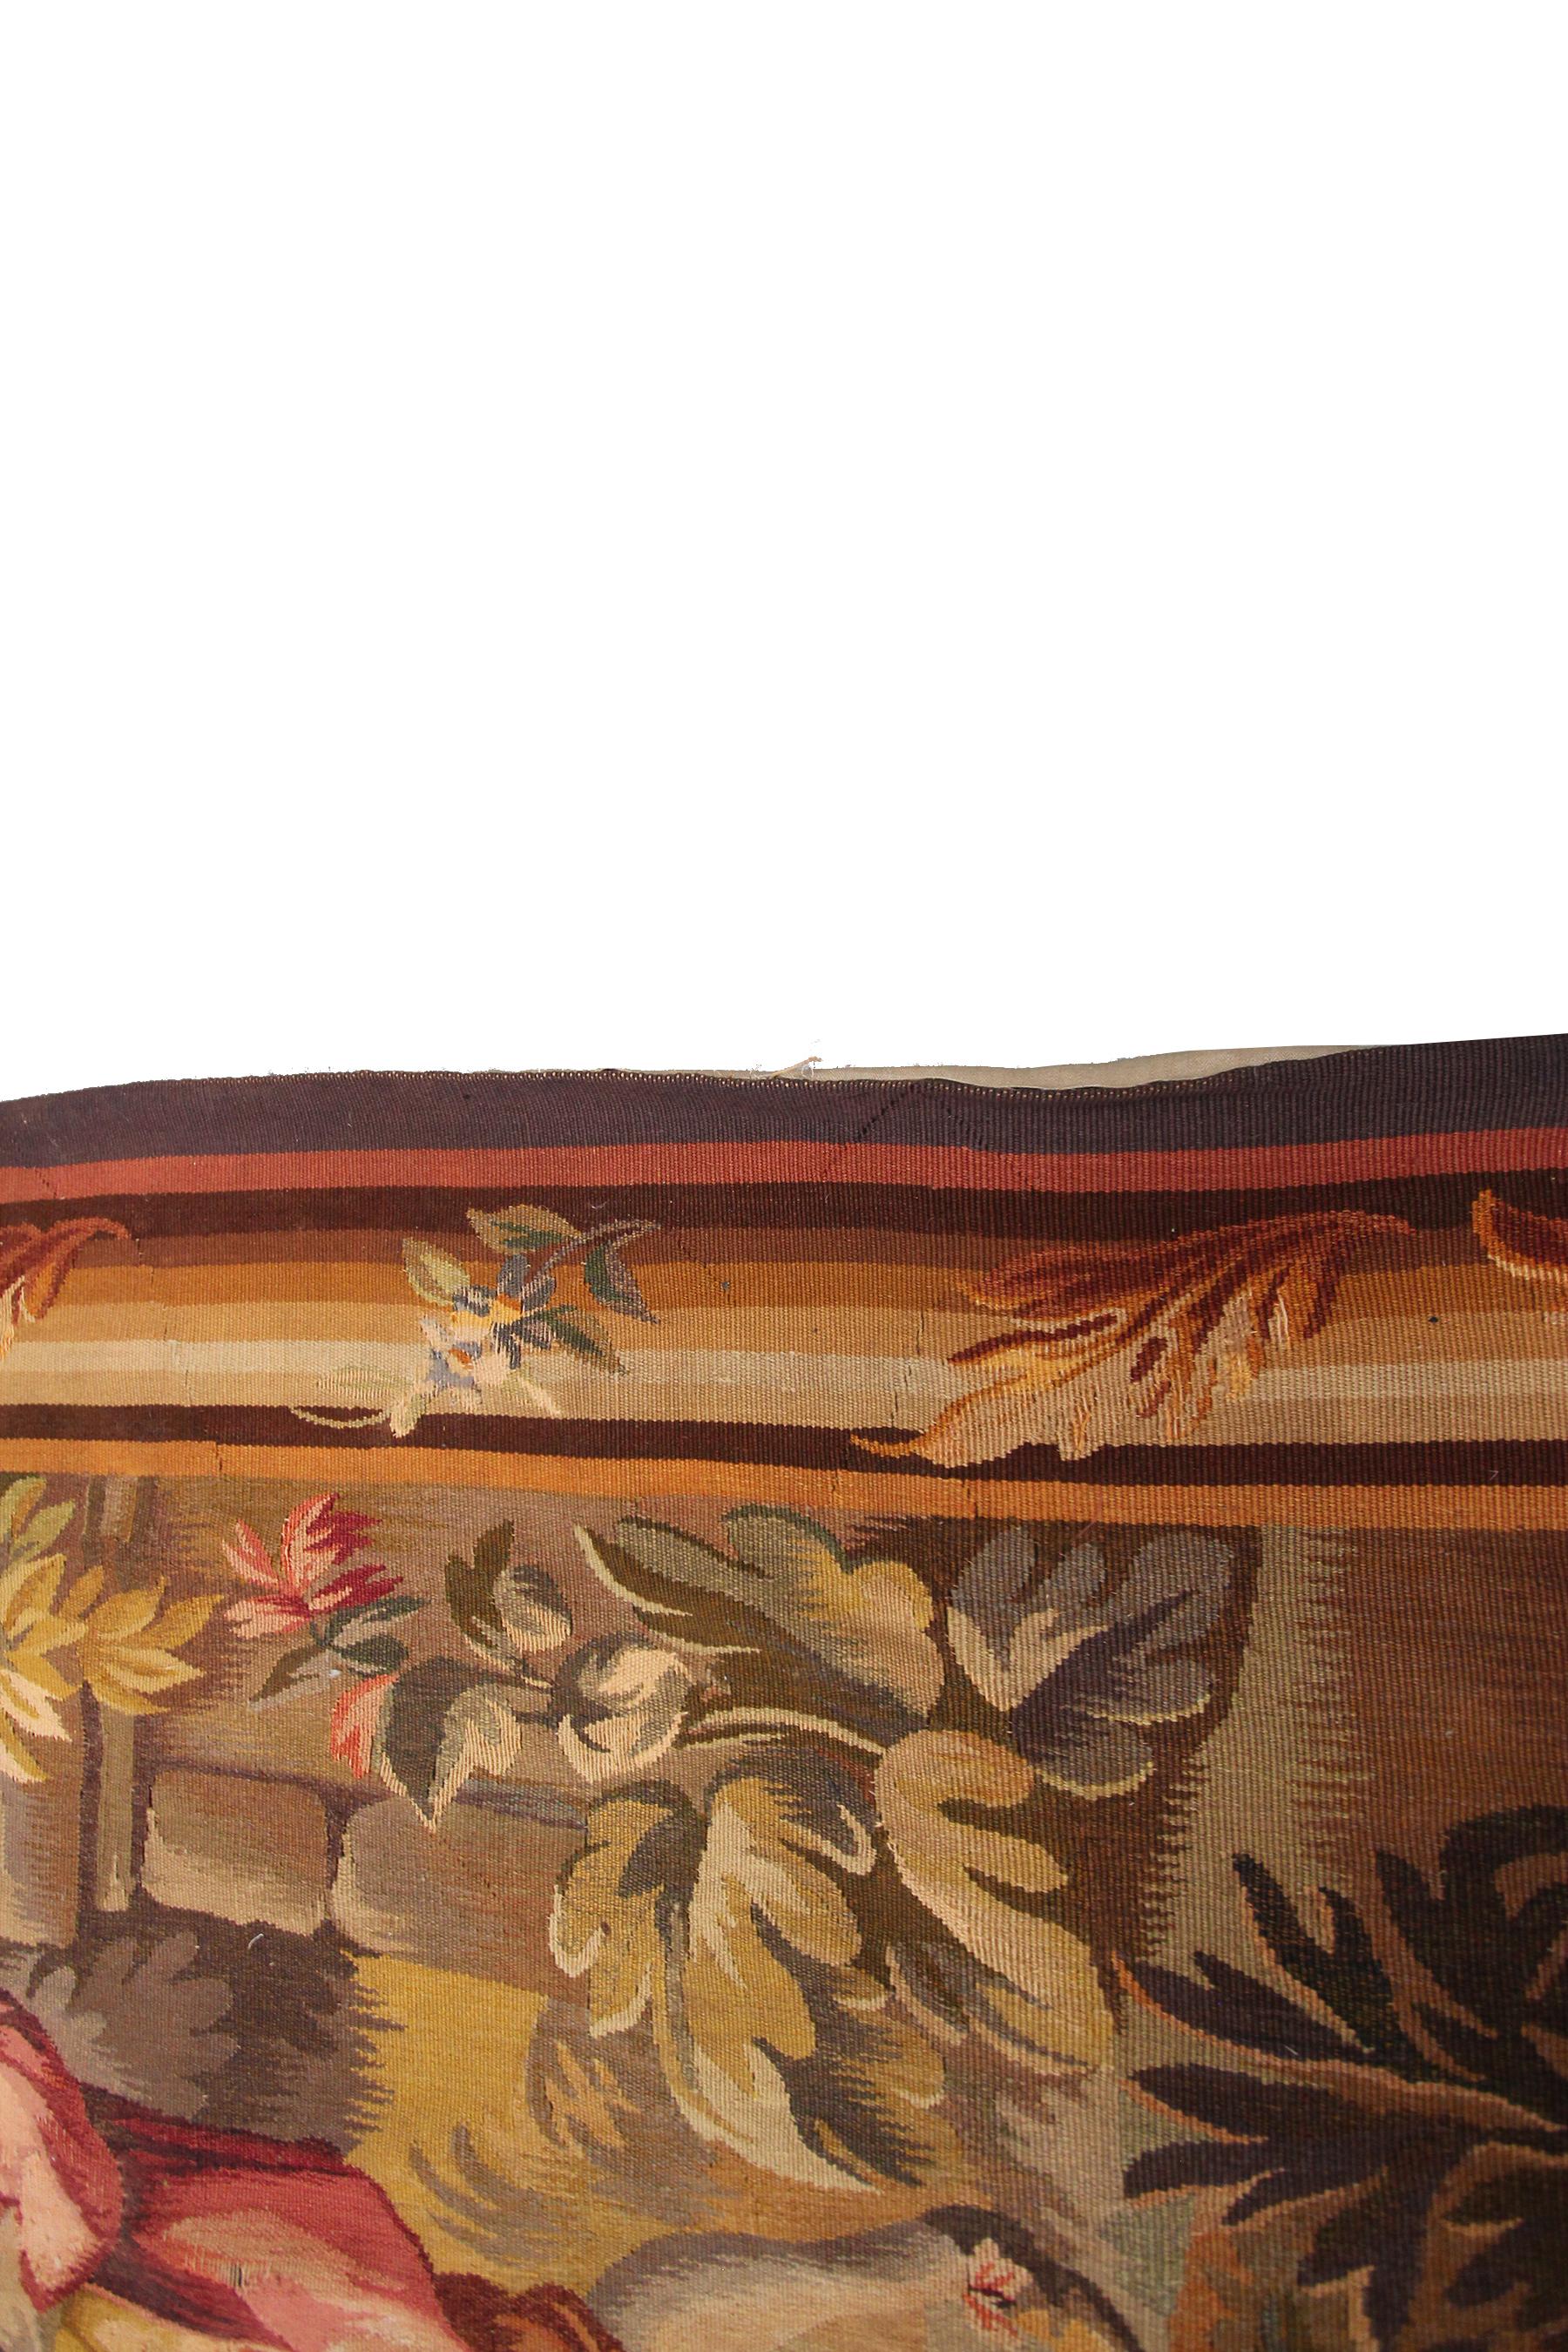 Antique French Tapestry Large Oversized Tapestry 1900 Wool & Silk 6x7 178x203cm For Sale 5